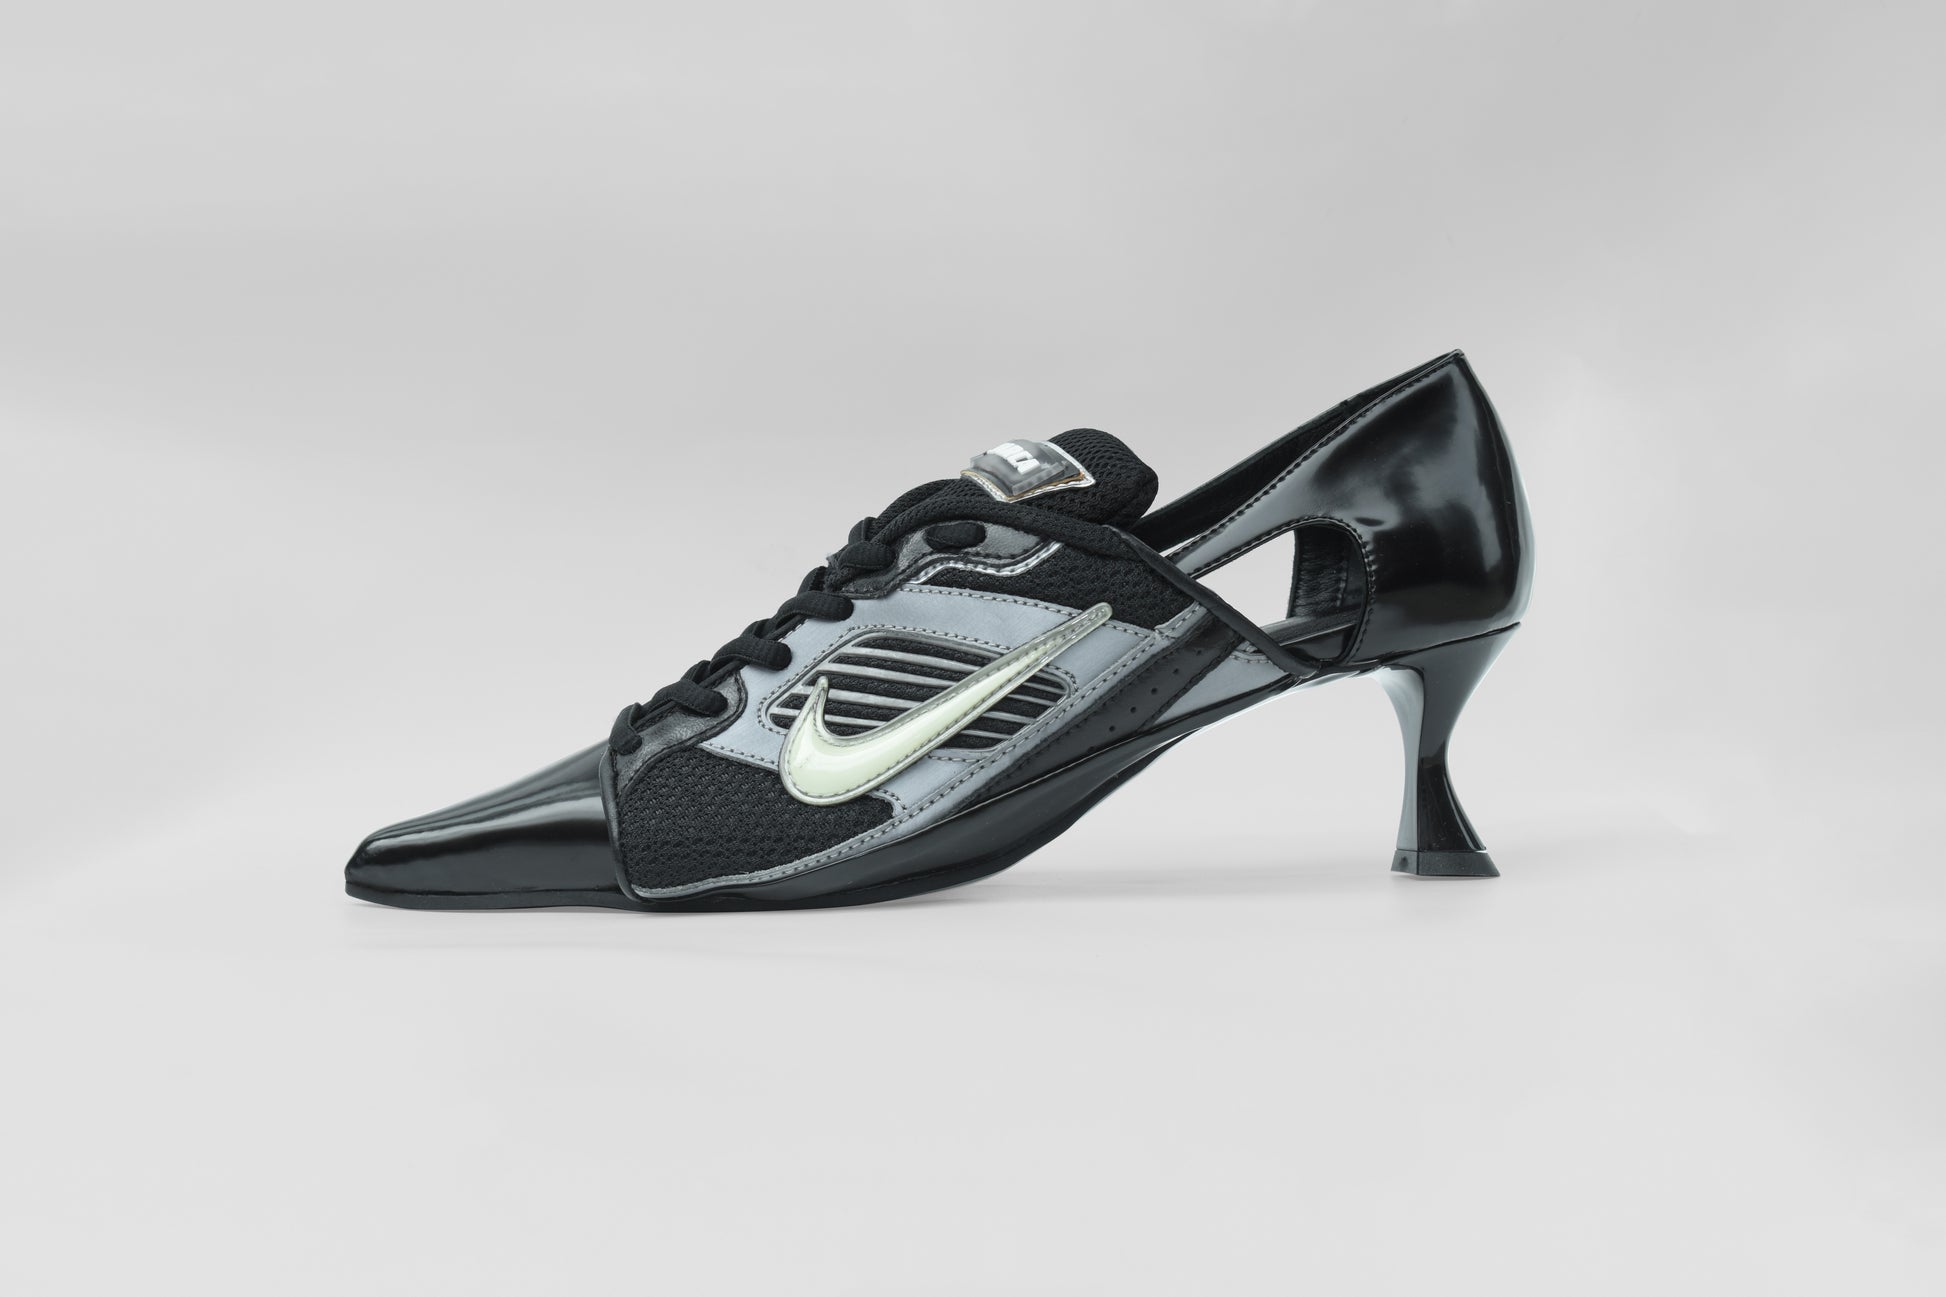 A photograph of the side view of Ancuta Sarca Lamborghini Heel Black, 6CM HEEL, UPCYCLED TRAINER CLOSED BACK PUMPS, POINTY TOE, BLACK FAUX LEATHER